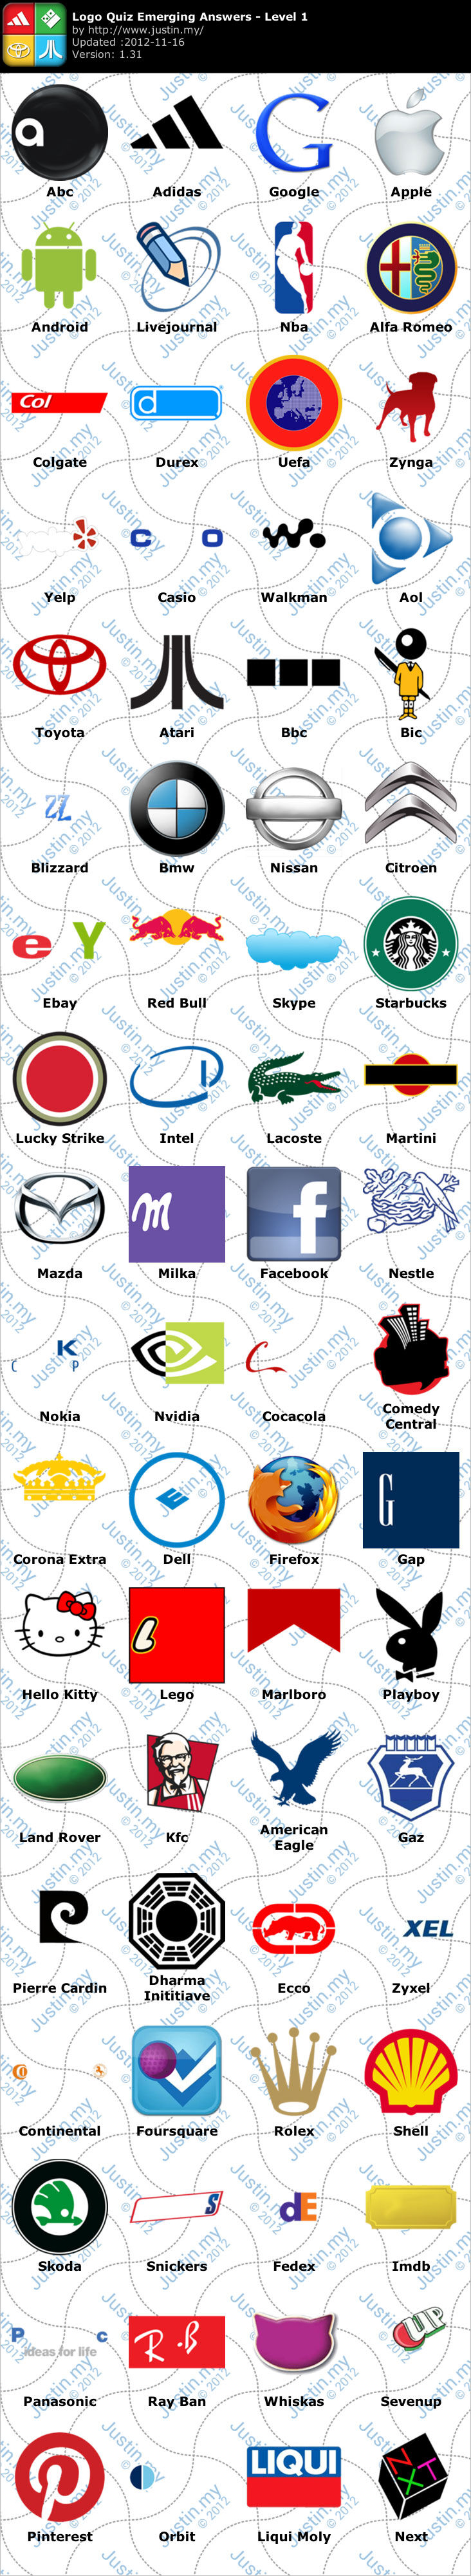 Logo Quiz Answers Level 1 free image download